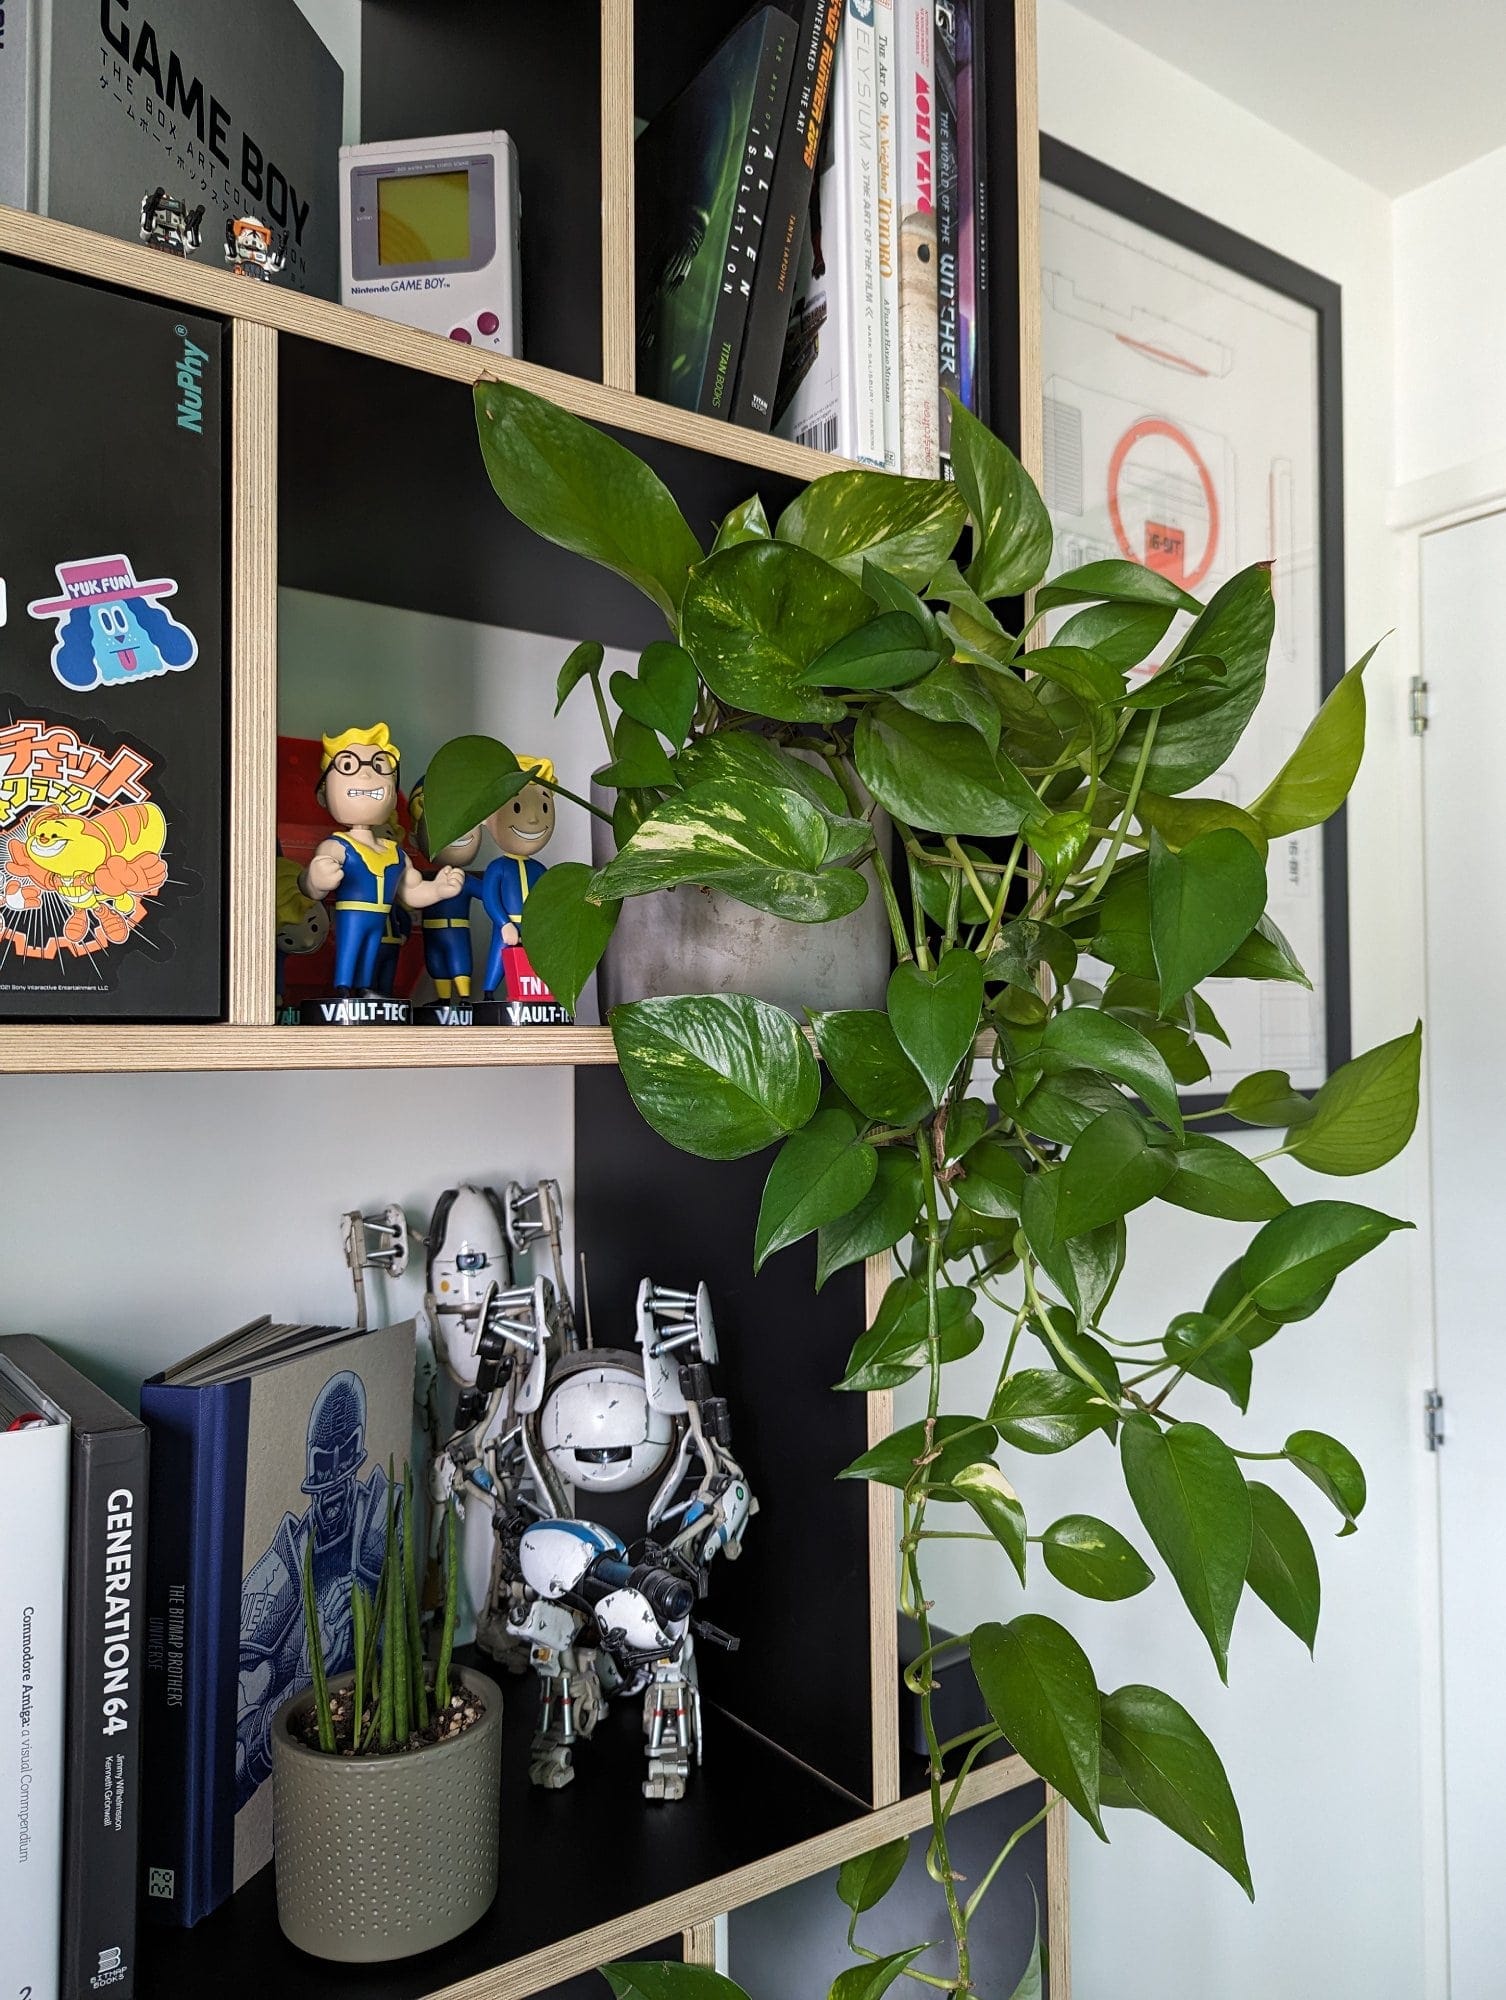 A Tylko bookshelf filled with books, collectibles, and a potted plant, featuring a retro Game Boy, Vault-Tec figures, and a robot model from Portal, with leafy green vines adding a touch of nature